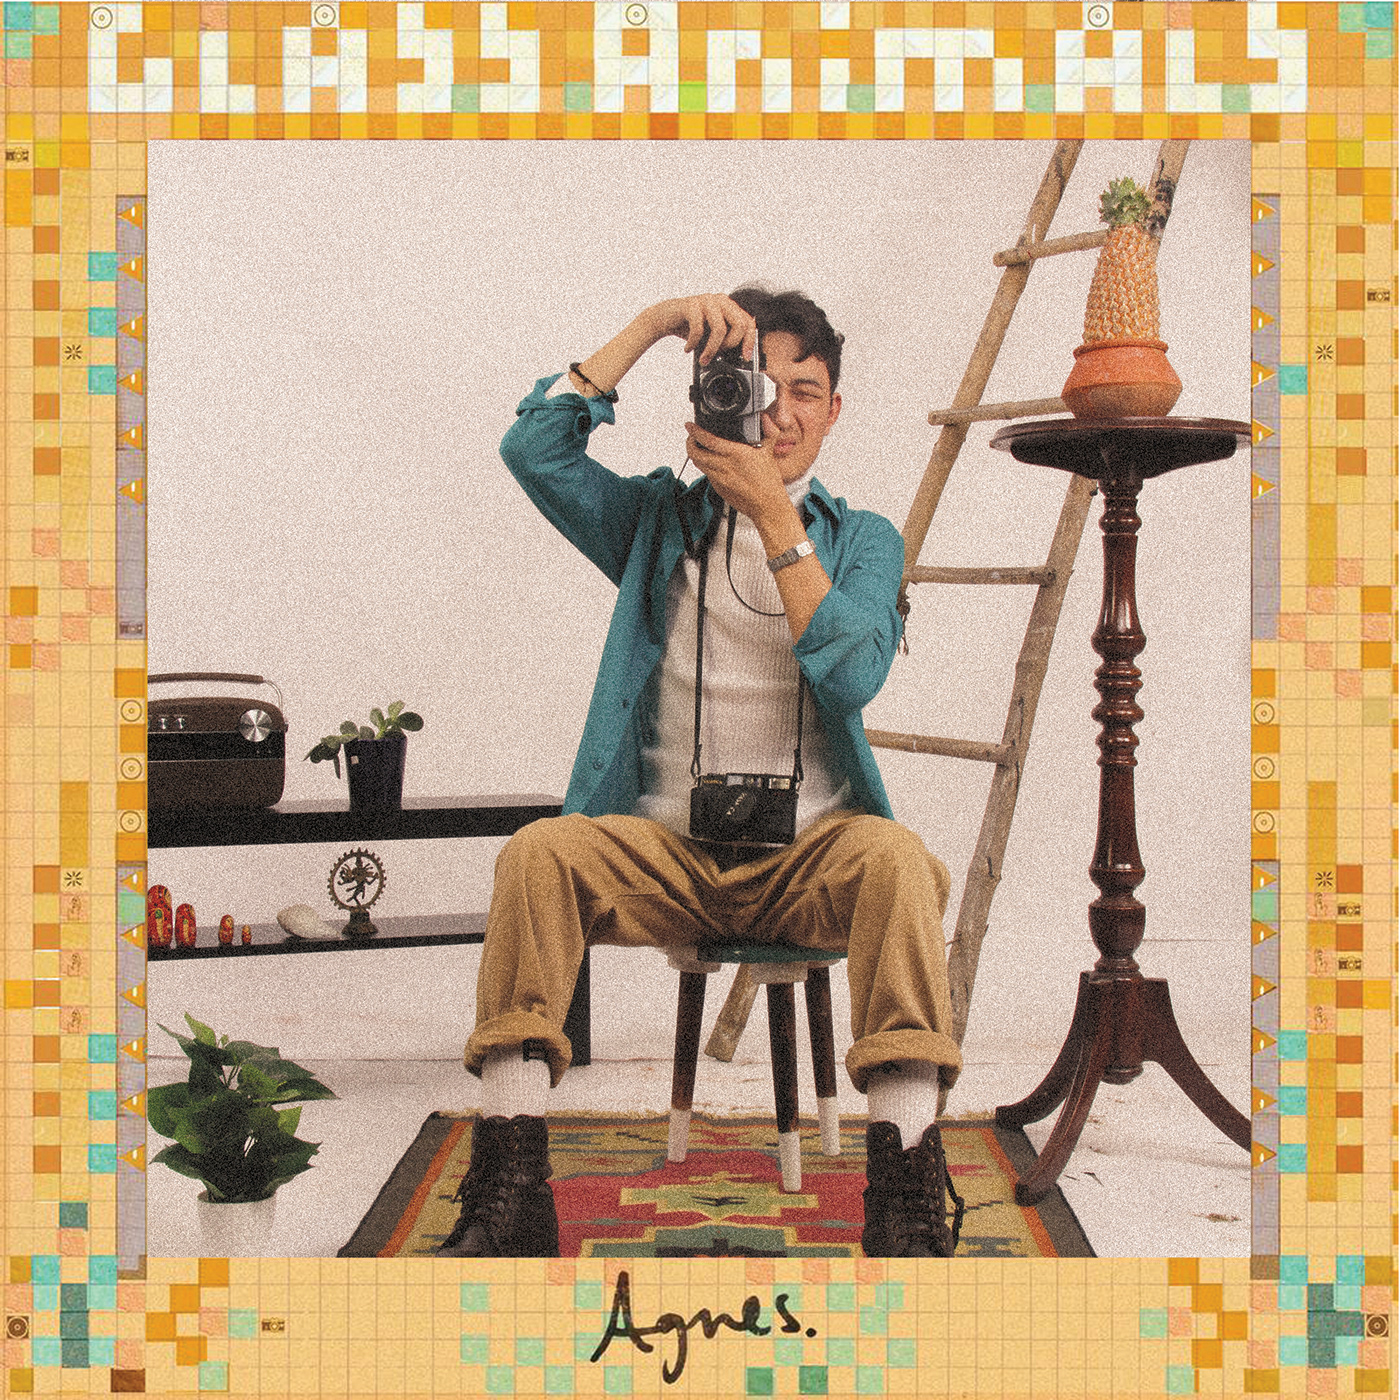 album cover styling  Creative Direction  Glass Animals music characters graphic design  photo editing Studio Shoot 70s Fashion